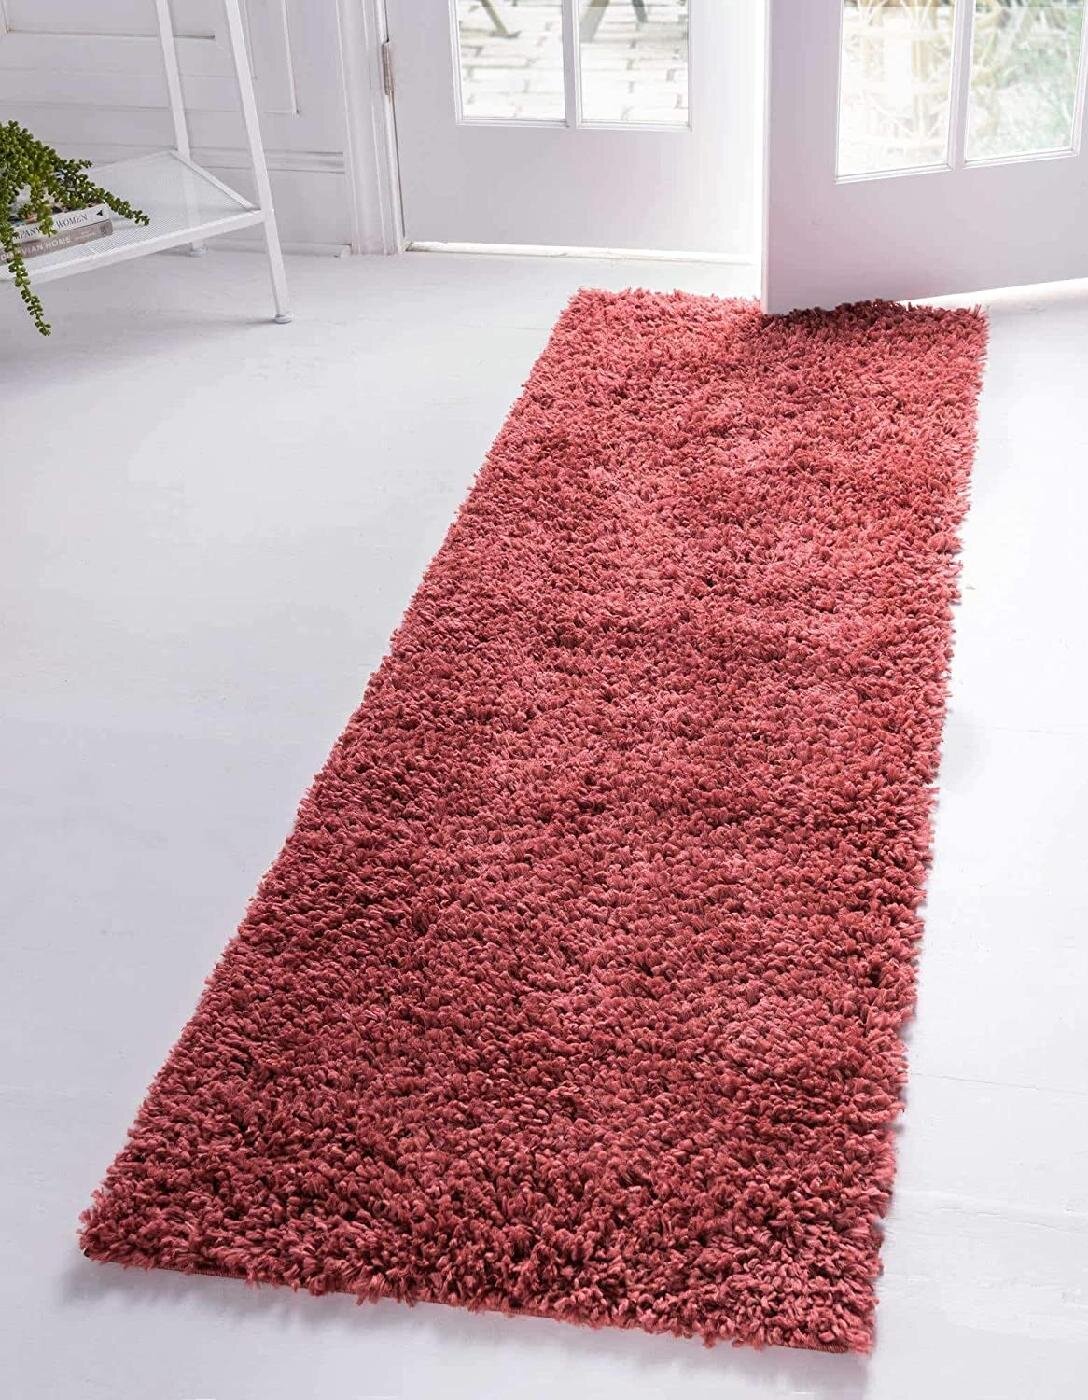 CHEAP RUGS ROUND SHAGGY 5cm MAROON HIGH QUALITY nice in touch CARPETS MANY SIZE 